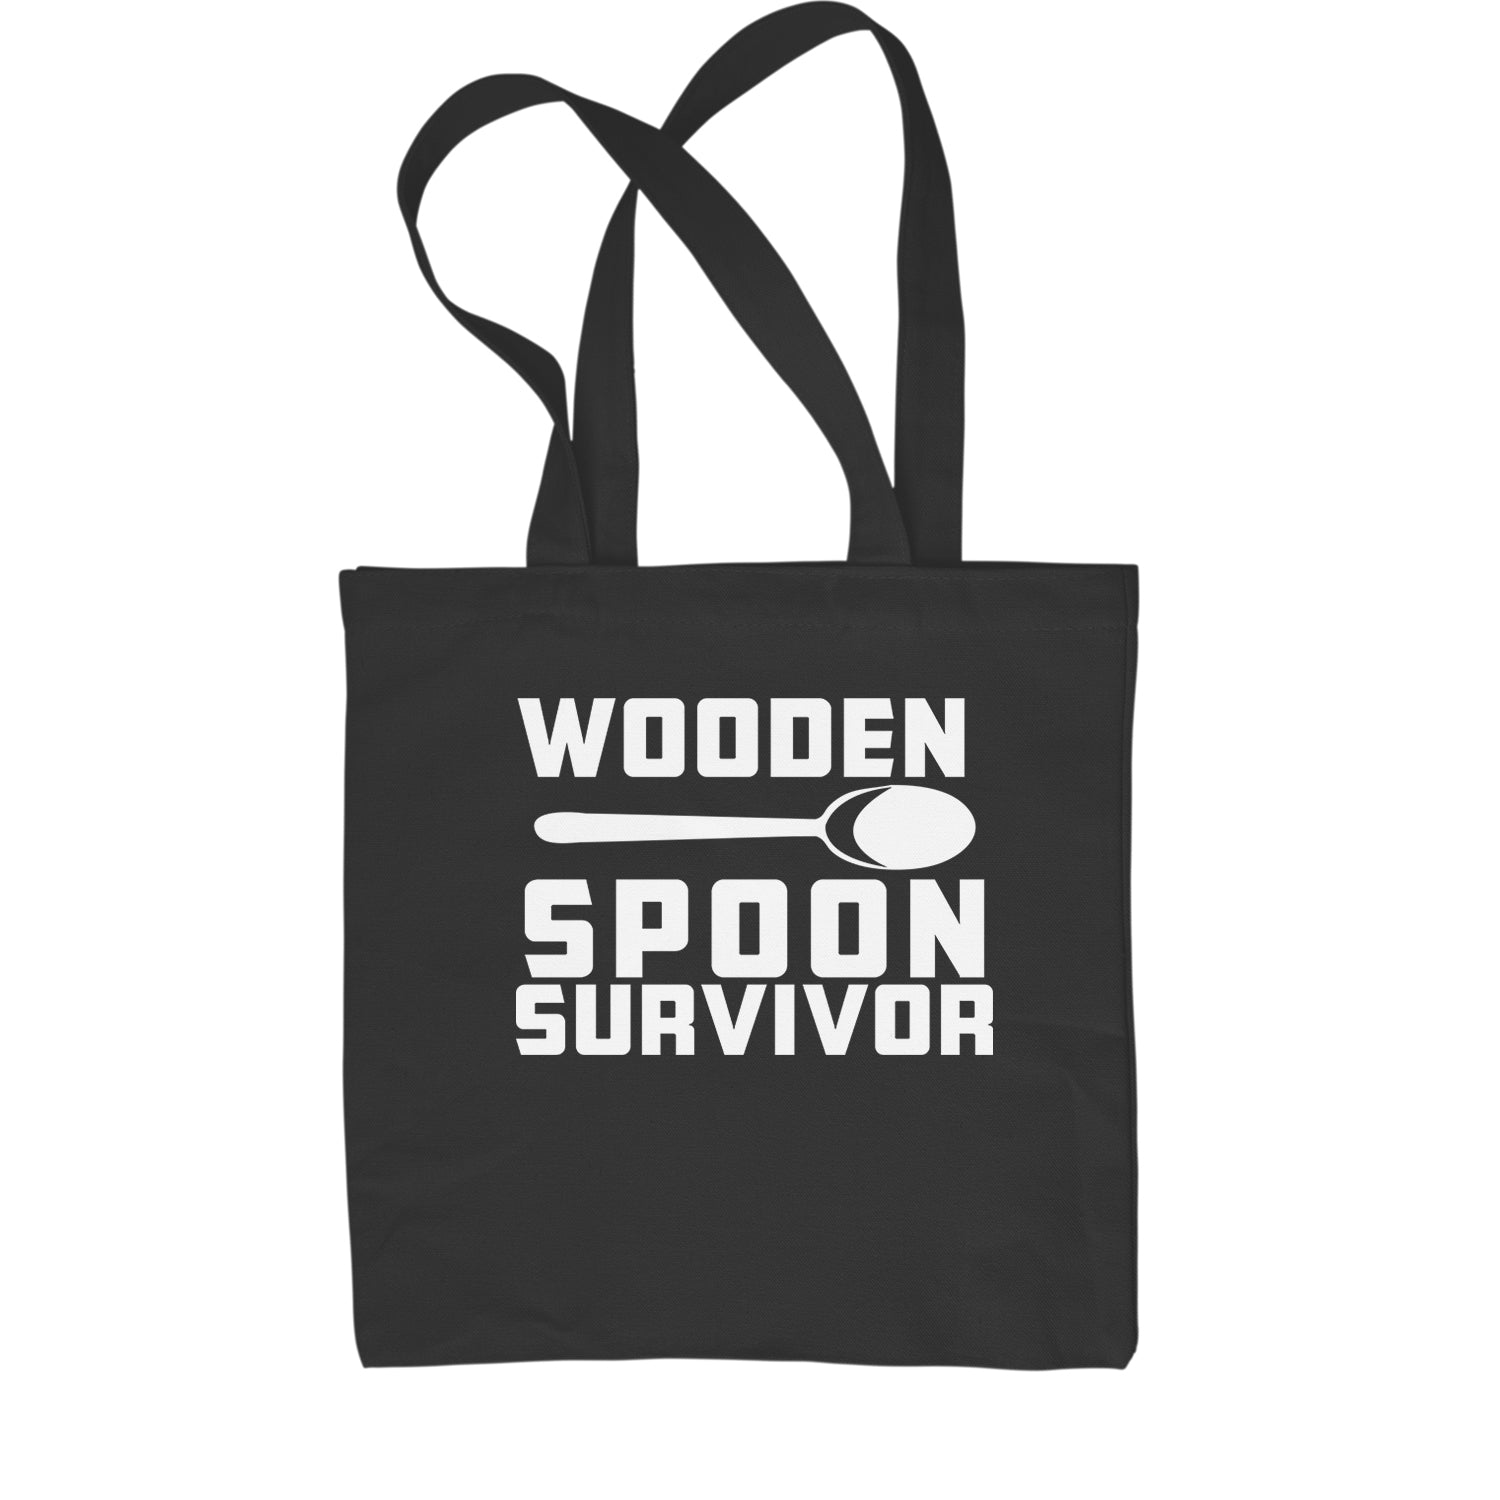 Wooden Spoon Survivor Shopping Tote Bag funny, shirt, spoon, survivor, wooden by Expression Tees